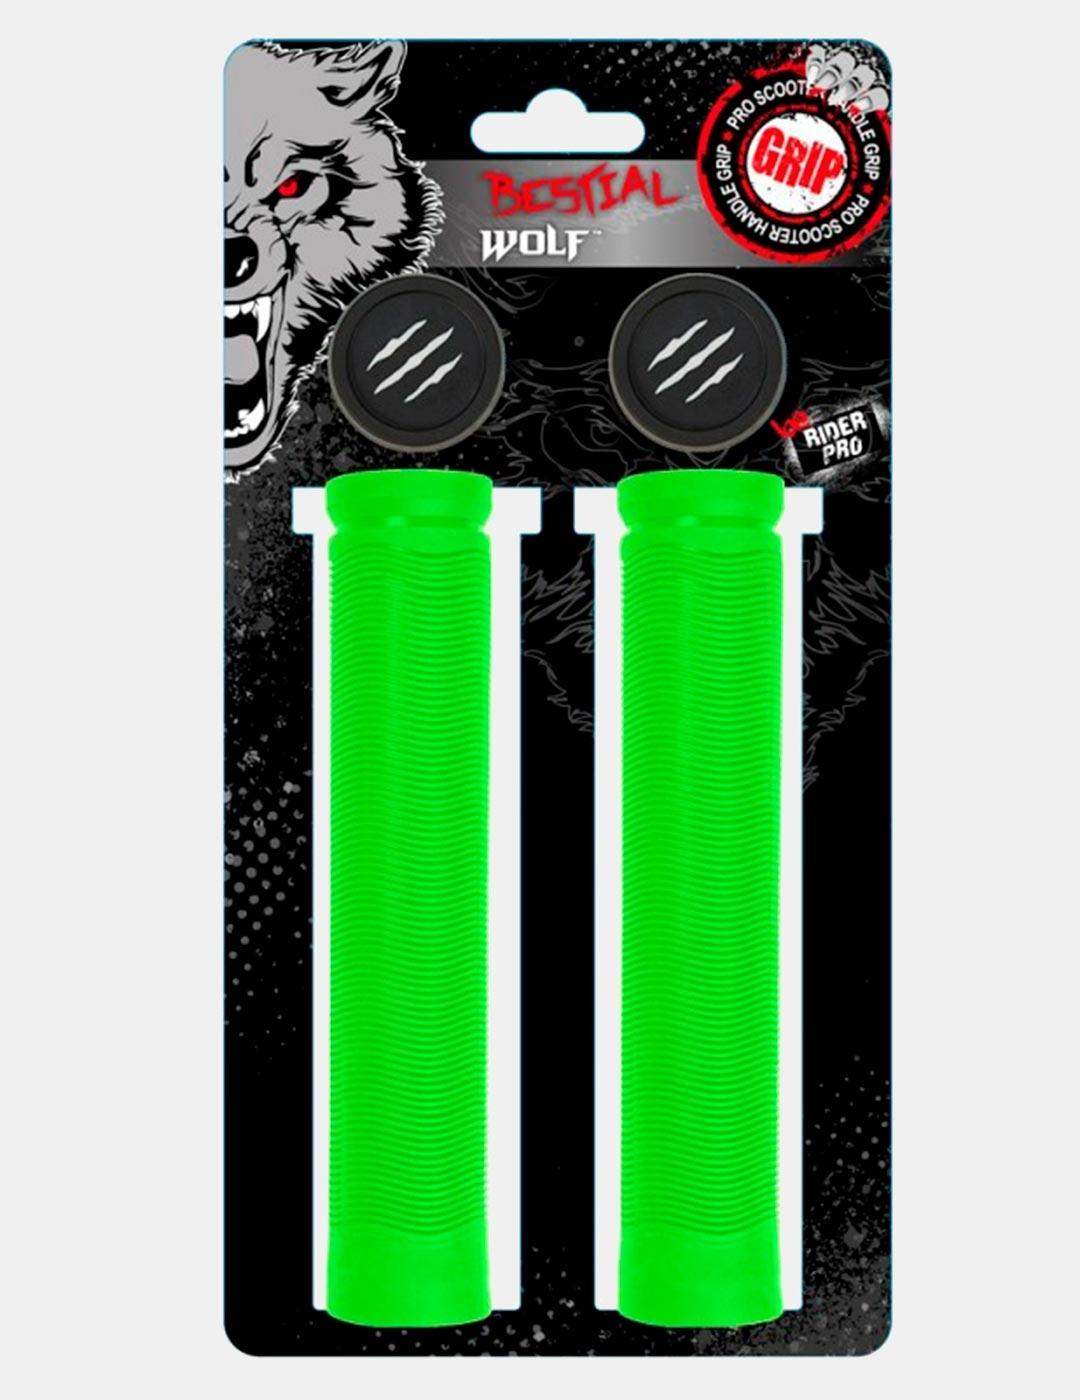 Manguitos Scooter BESTIAL WOLF RS81 155MM - Verde